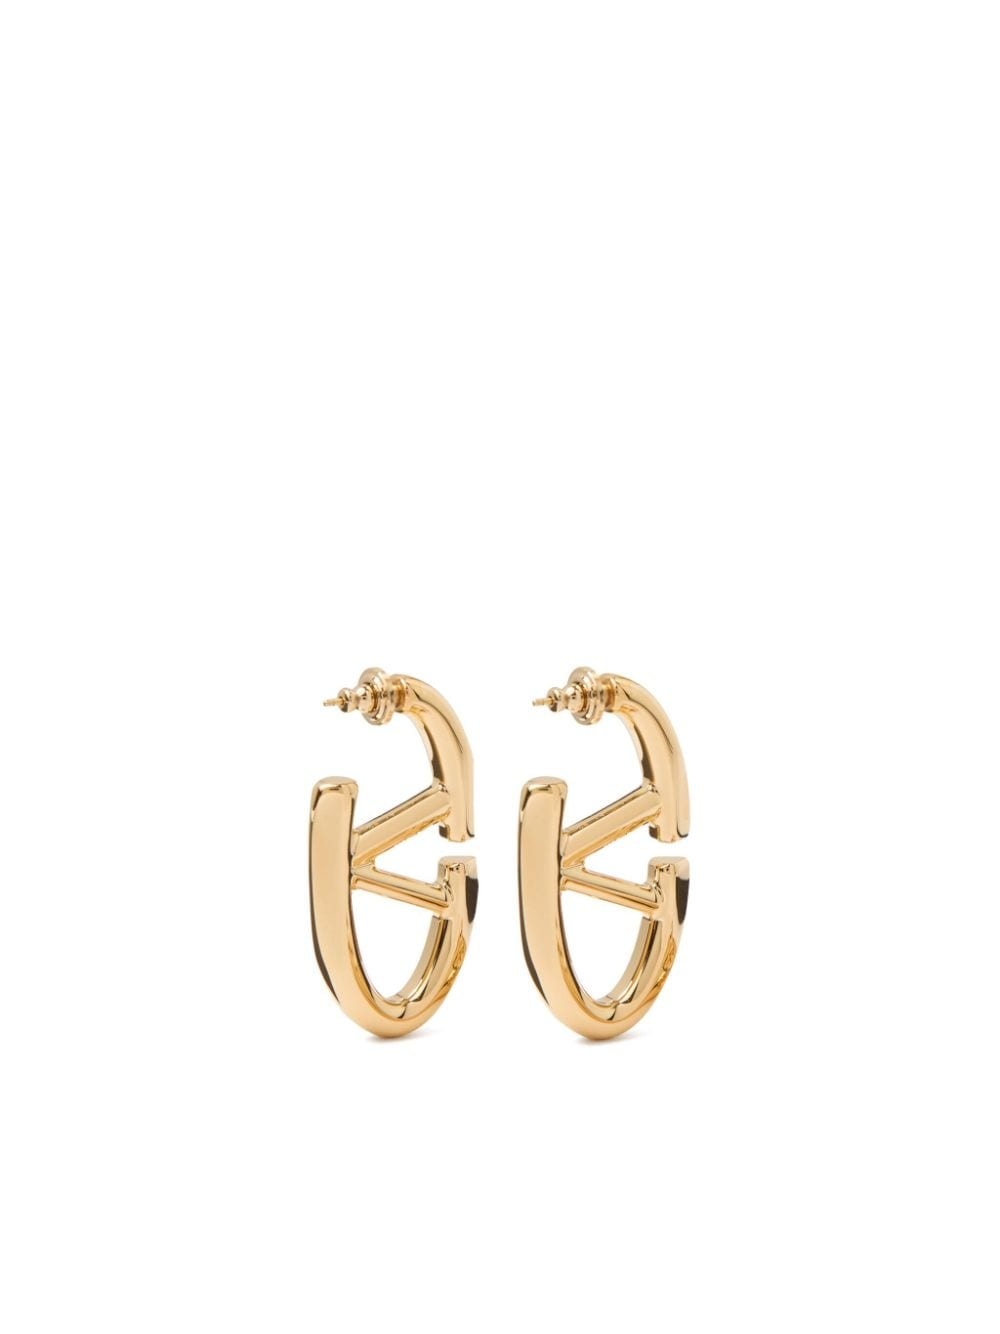 VLogo The Bold Edition earrings - 1